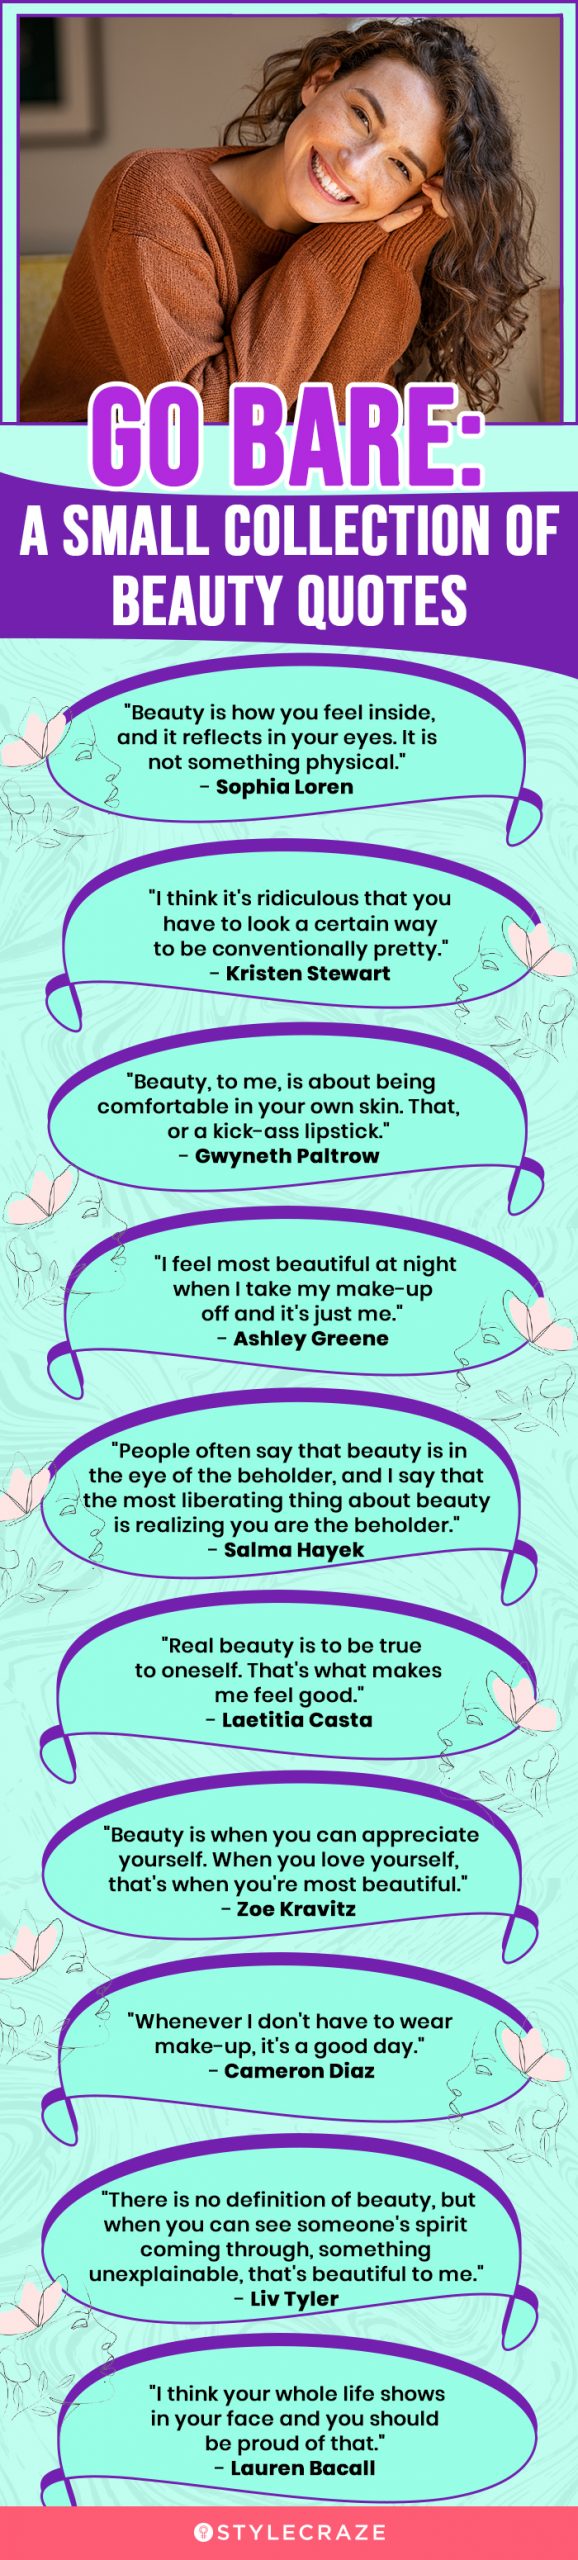 go bare a small collection of beauty quotes (infographic)